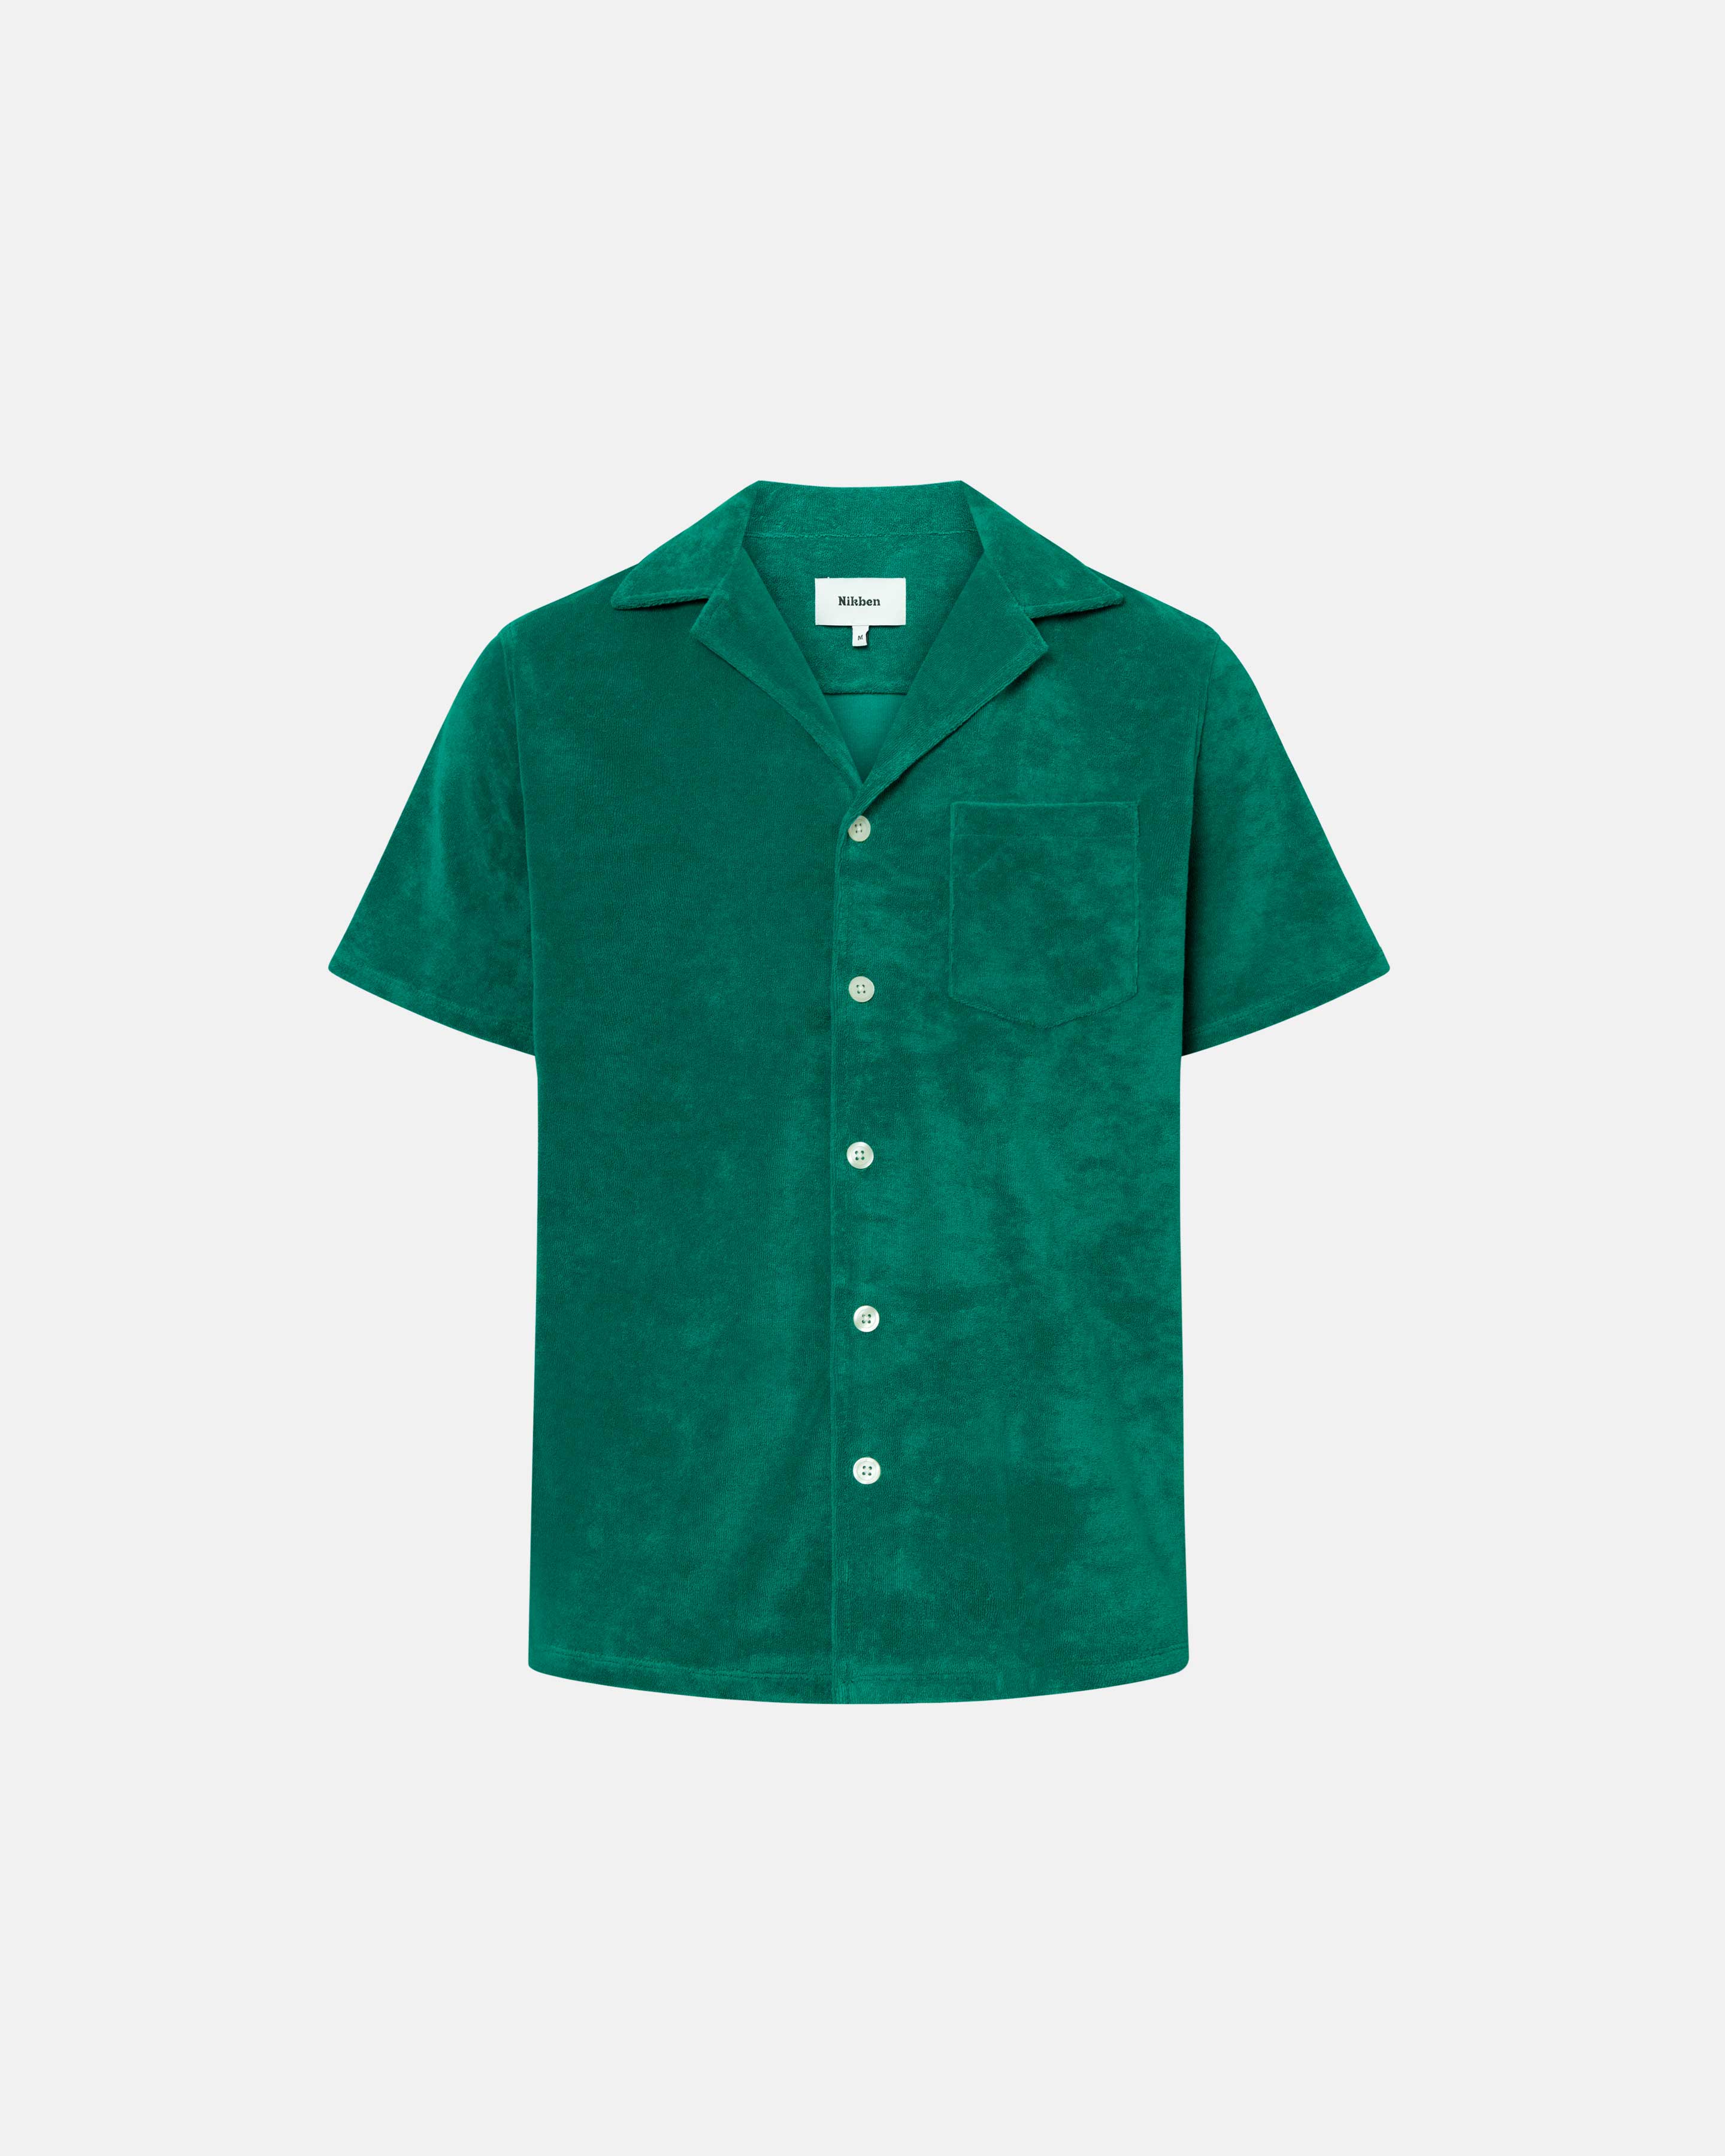 Green short sleeve shirt with white button closure and one chest pocket